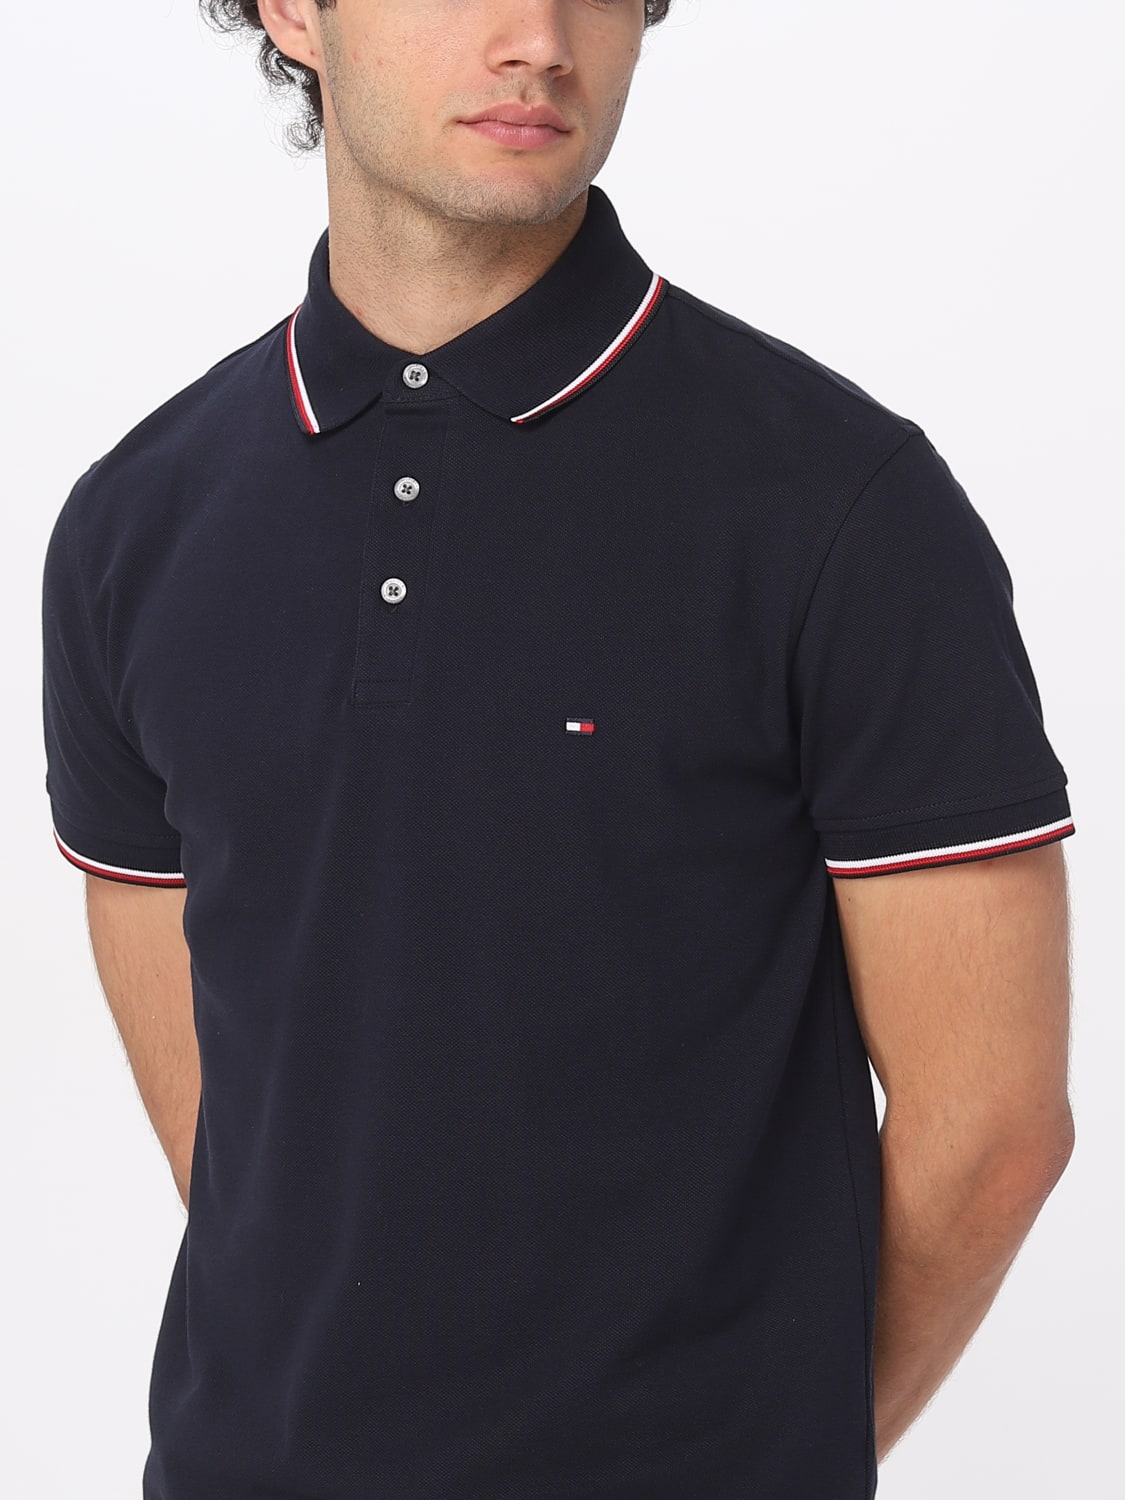 HILFIGER: polo shirt for - Blue | Tommy Hilfiger polo shirt MW0MW30750 online at GIGLIO.COM